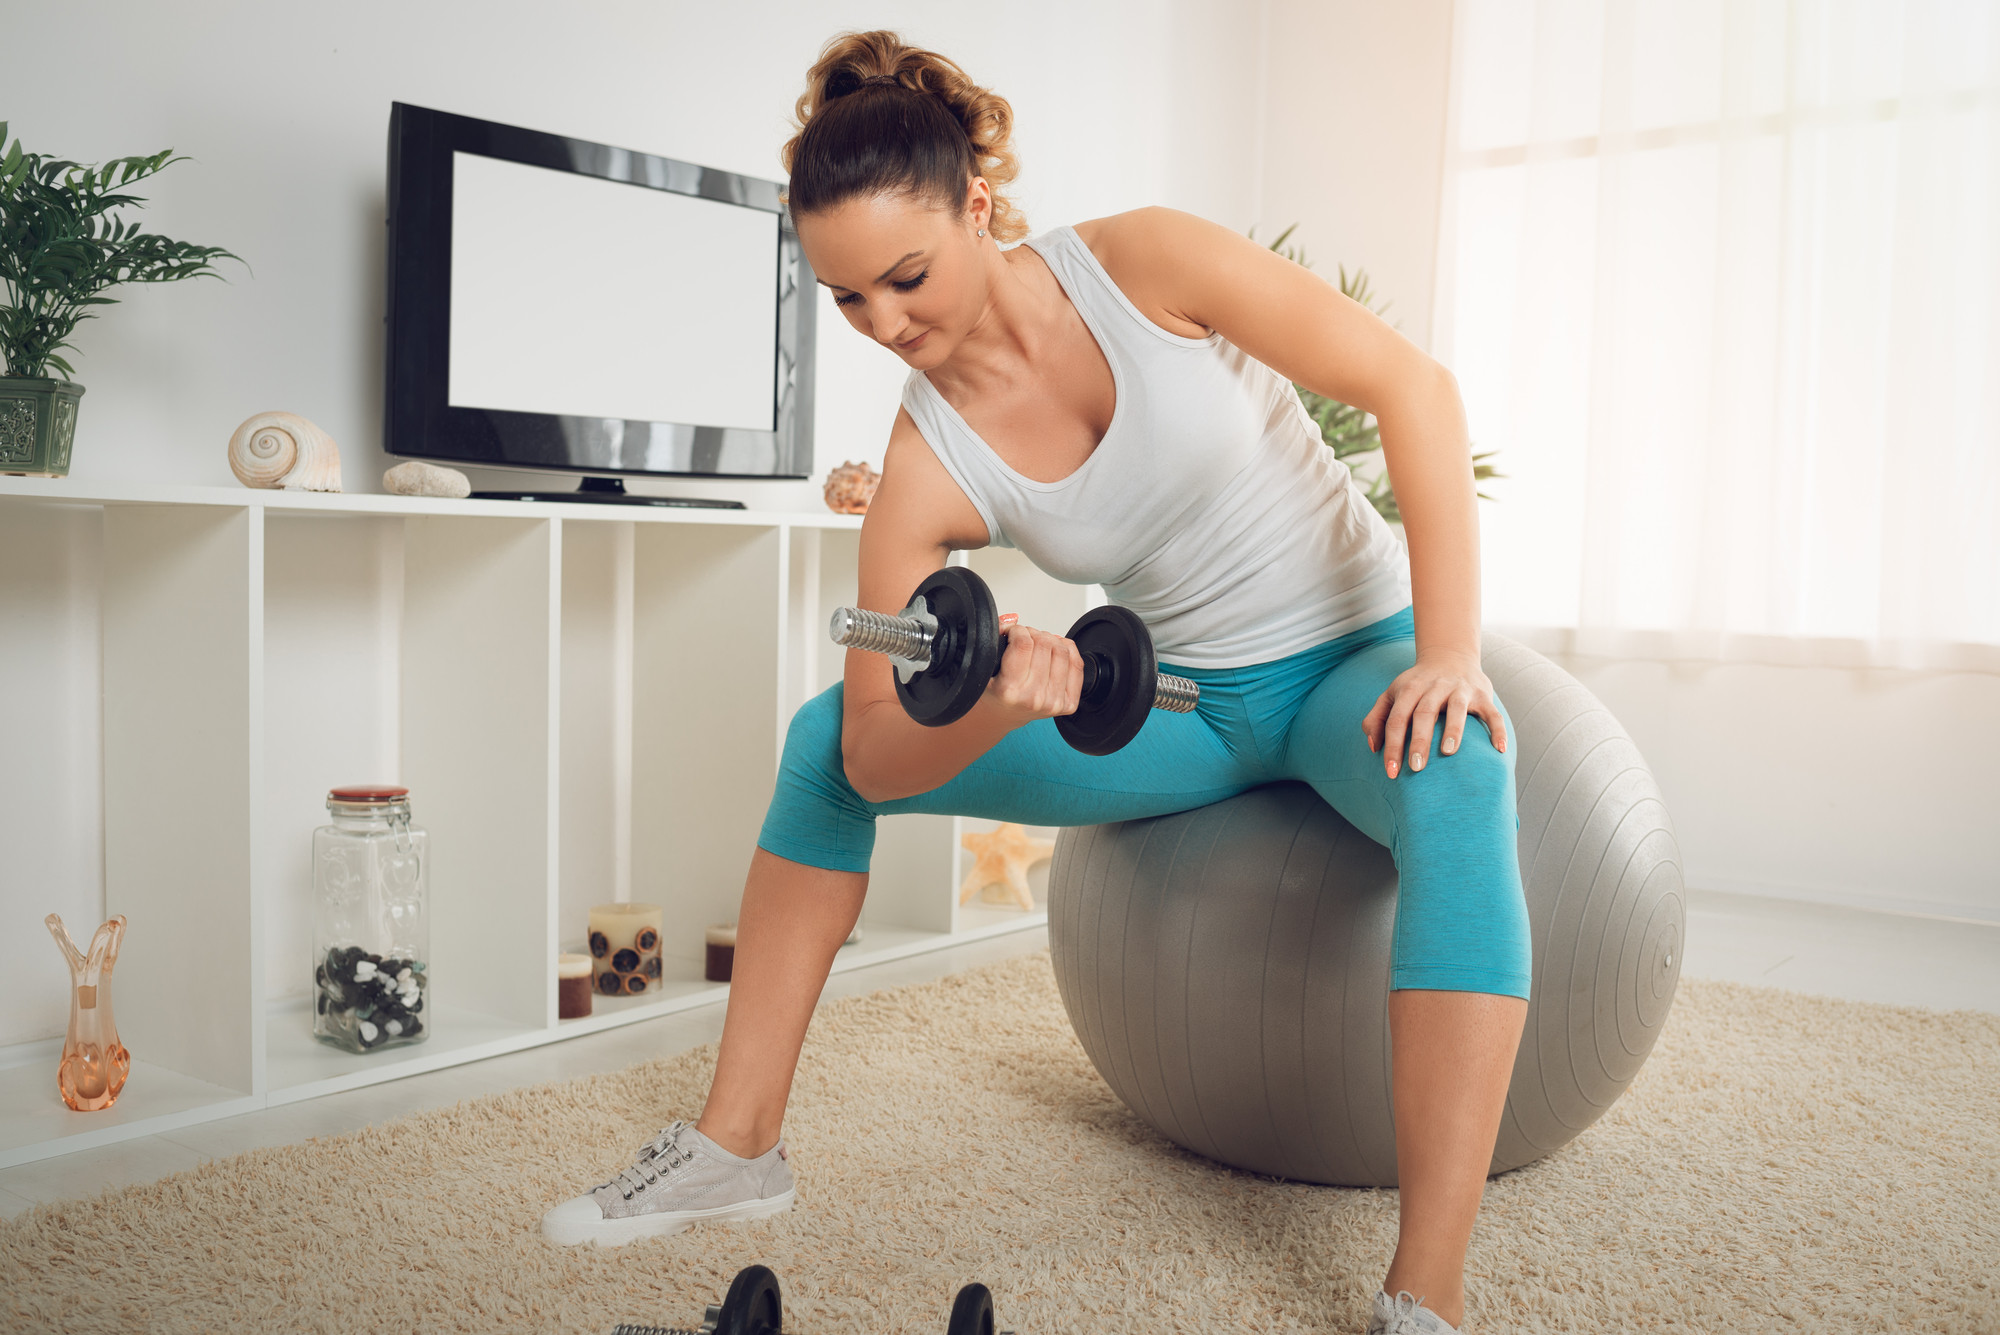 Exercises to do at home with dumbbells